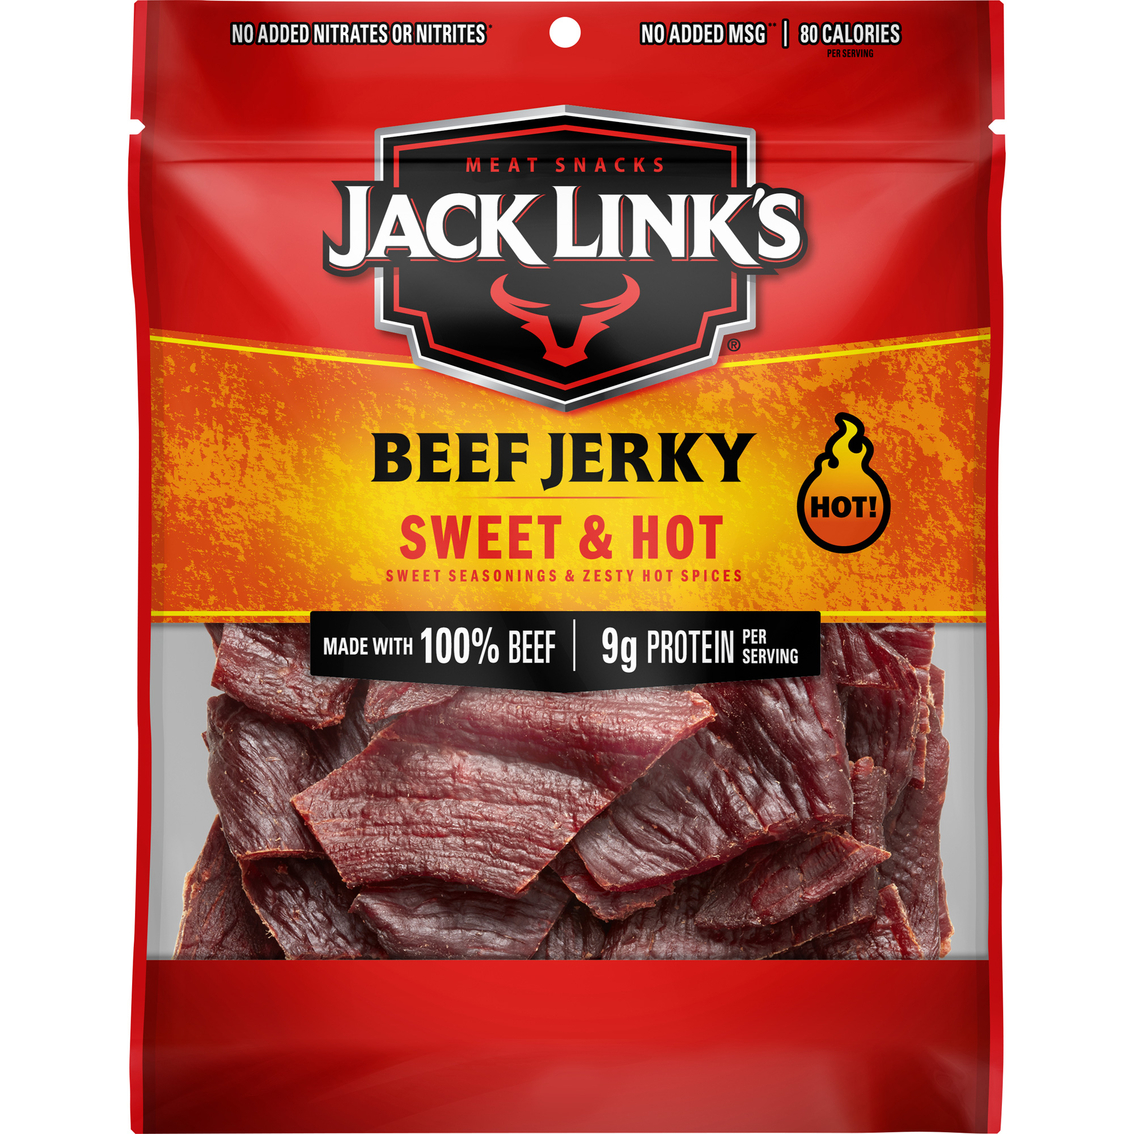 Jack Link's Sweet and Hot Beef Jerky 3.25 Oz.